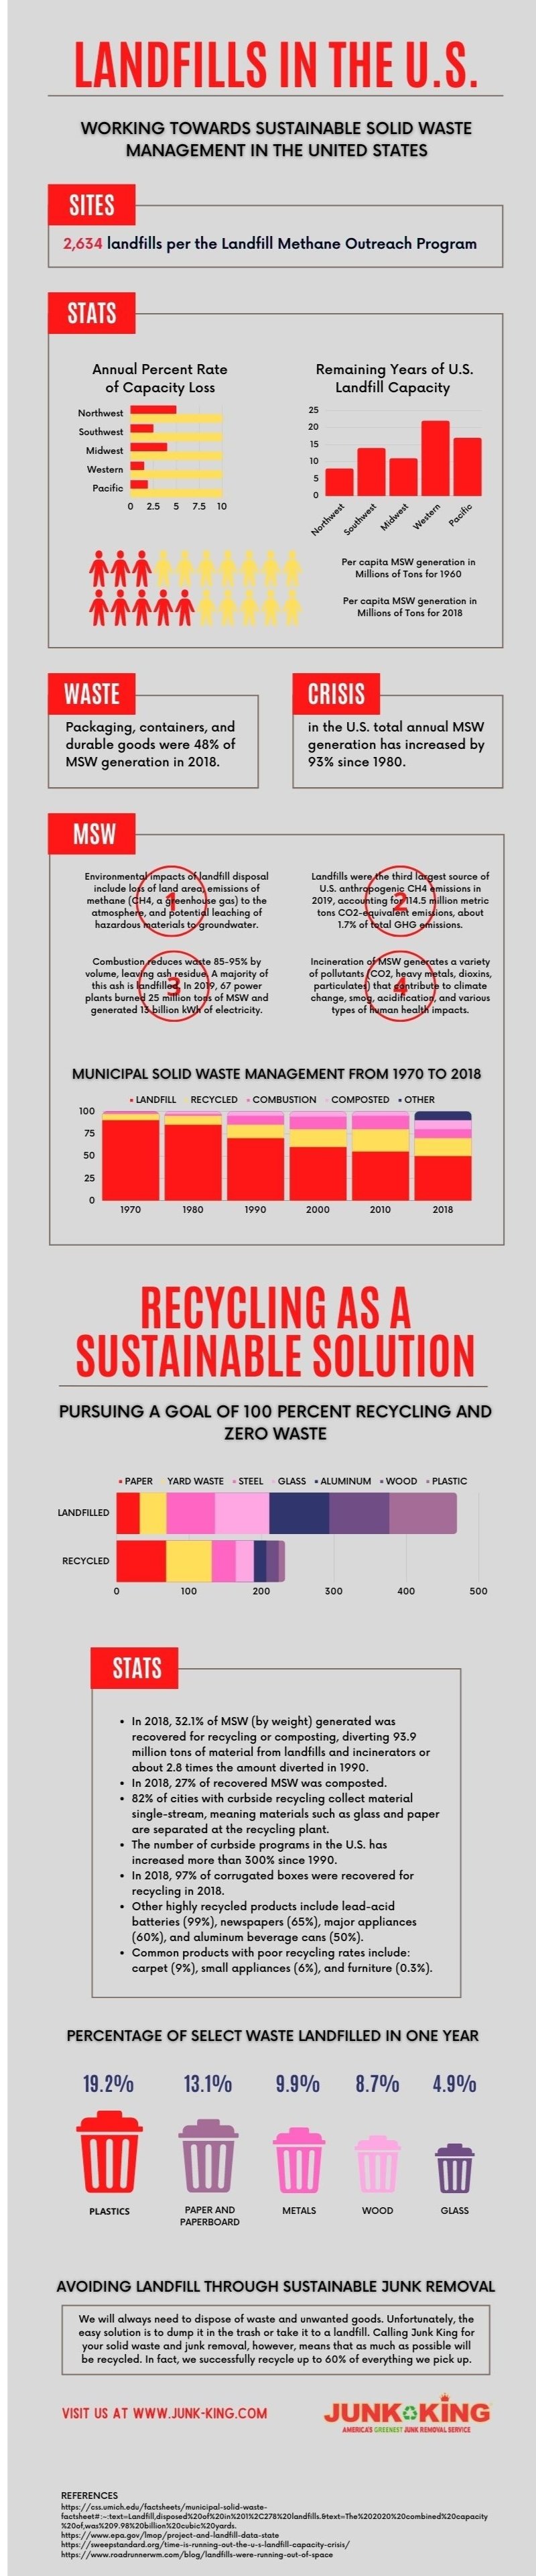 landfills-and-sustainable-waste-management